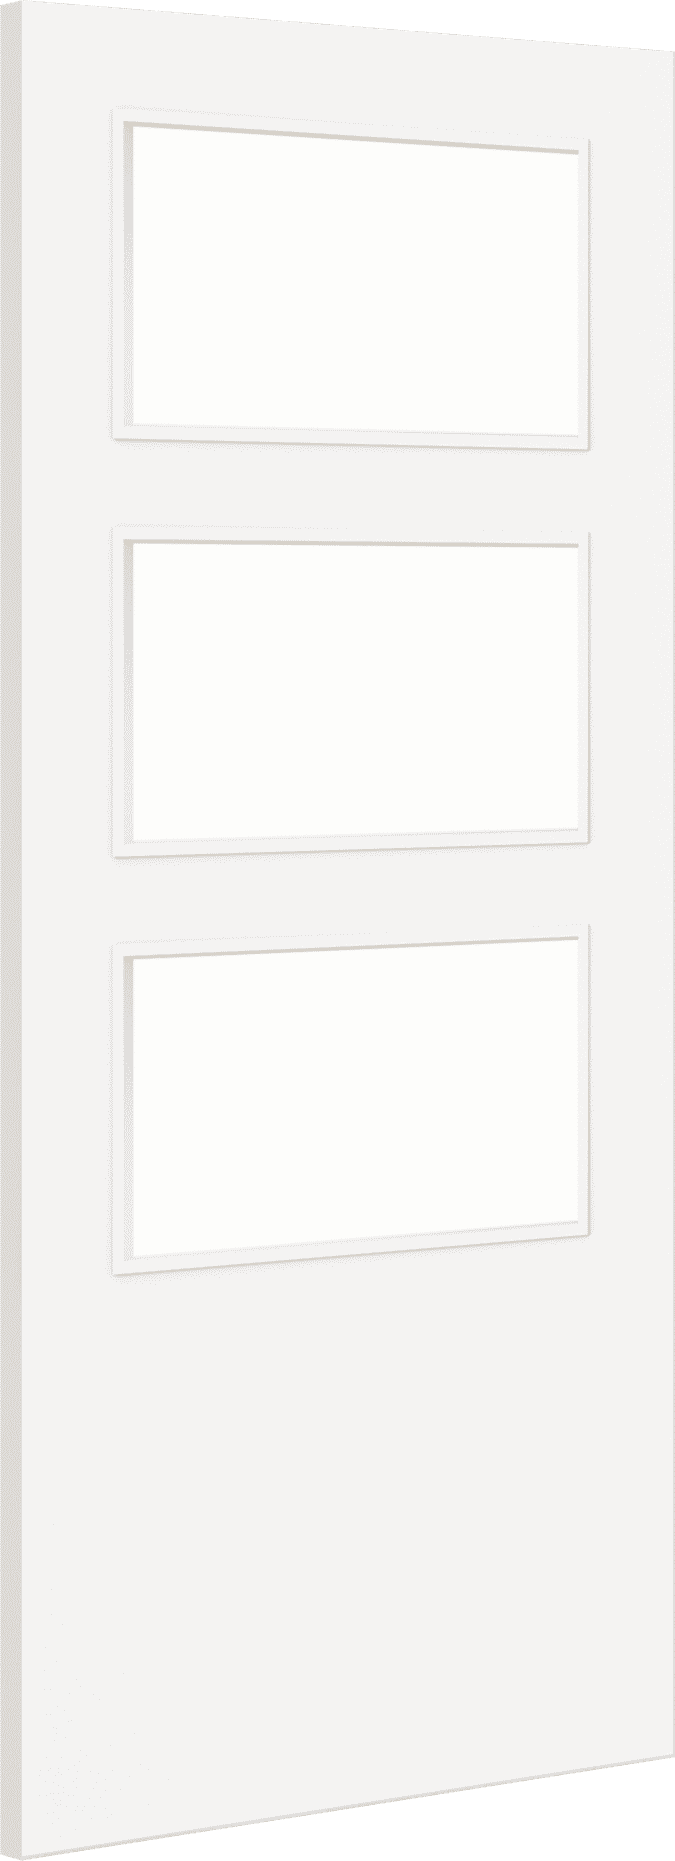 1981mm x 686mm x 44mm (27") Architectural Paint Grade White 03 Frosted Glazed Fire Door Blank